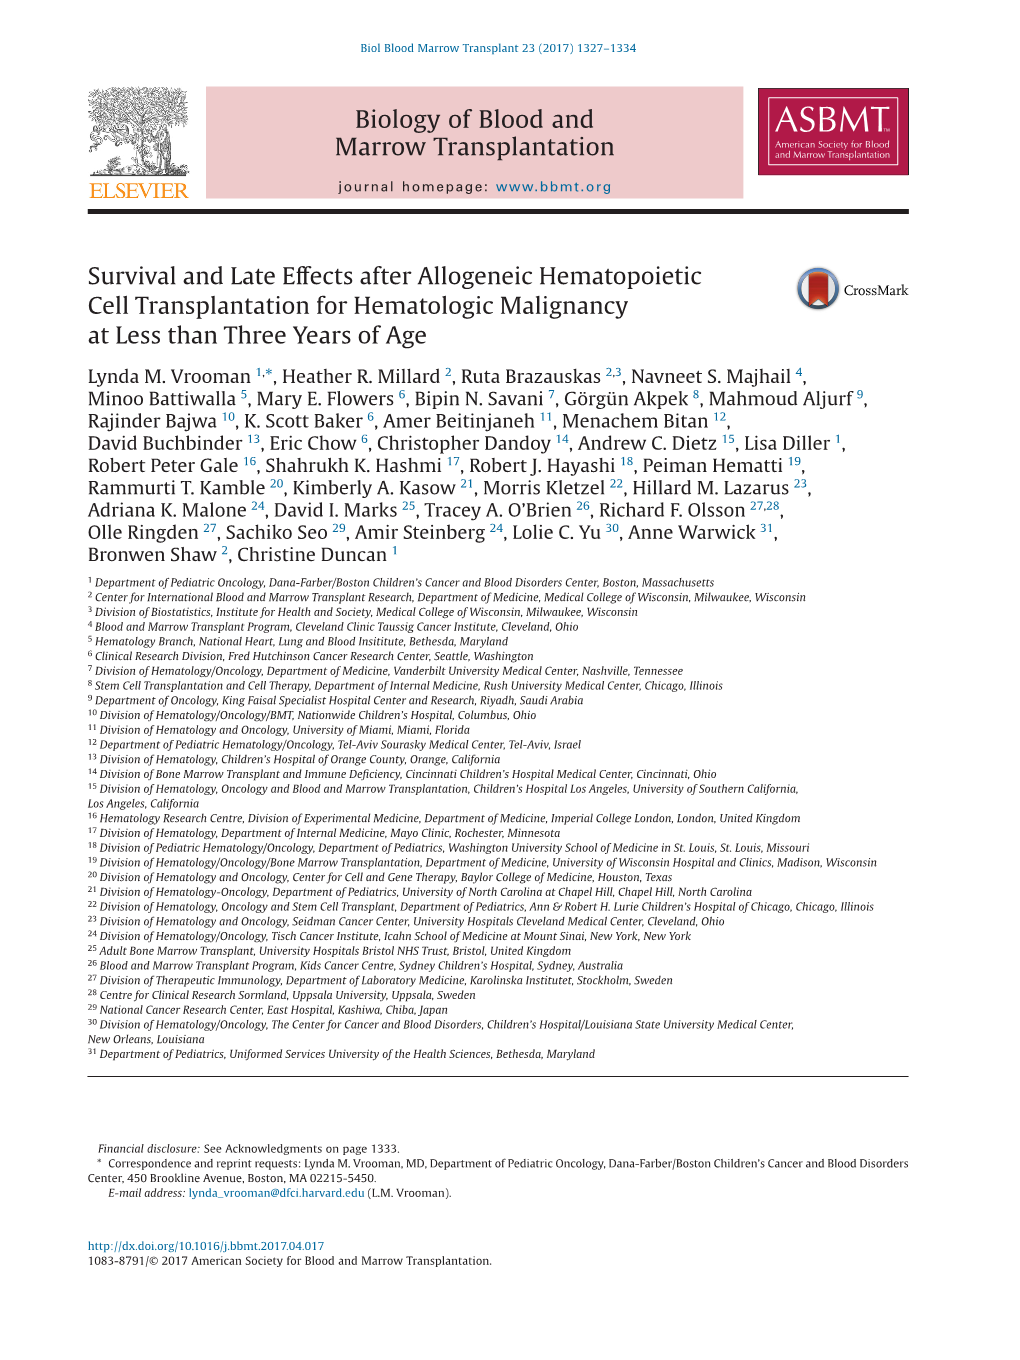 Survival and Late Effects After Allogeneic Hematopoietic Cell Transplantation for Hematologic Malignancy at Less Than Three Years of Age